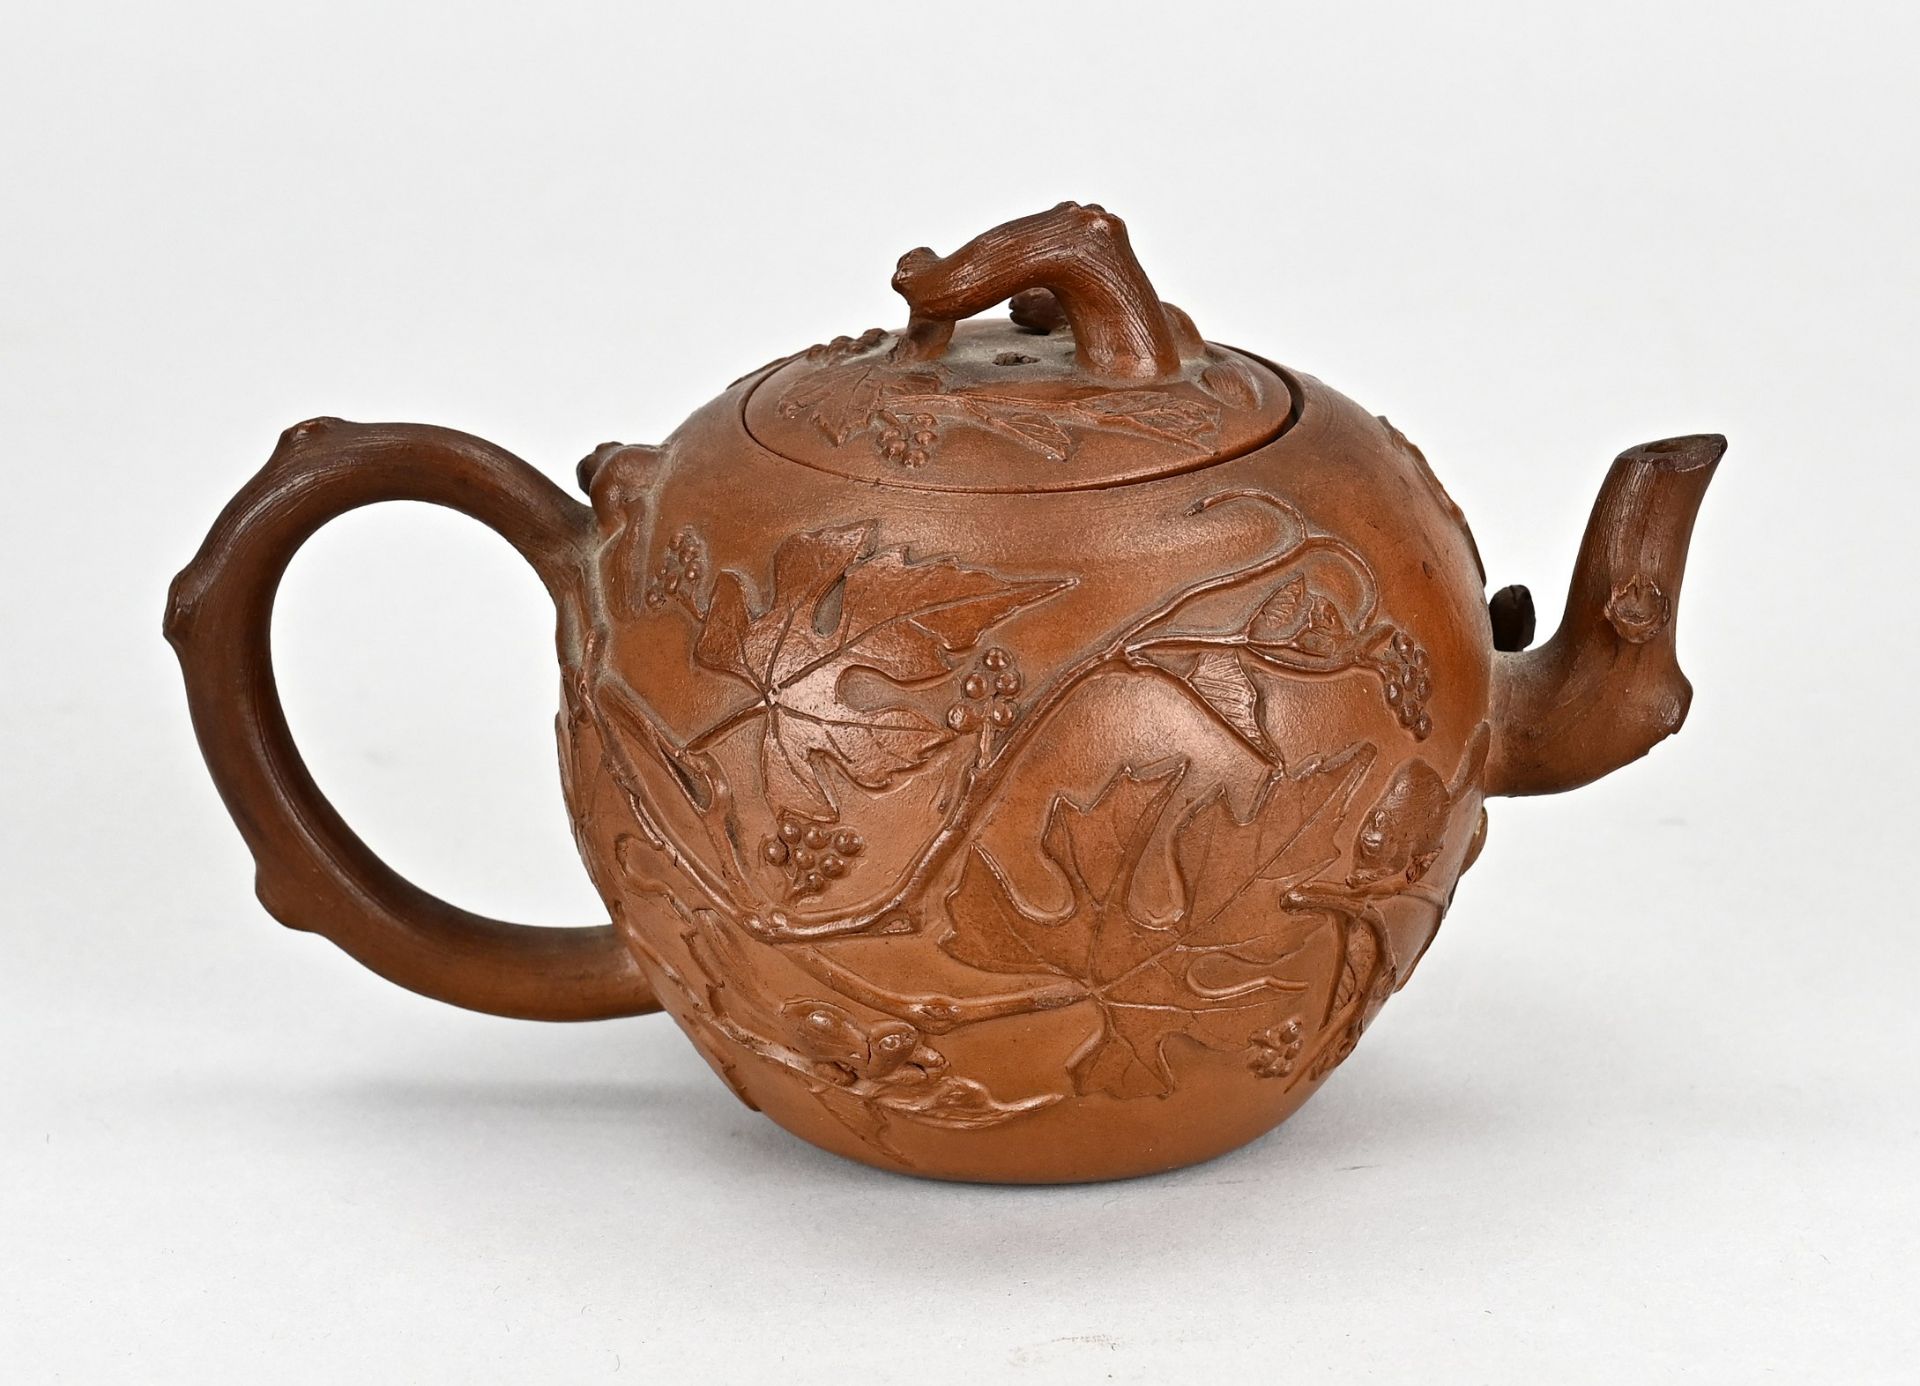 Chinese teapot Ø 9.5 cm. - Image 2 of 3